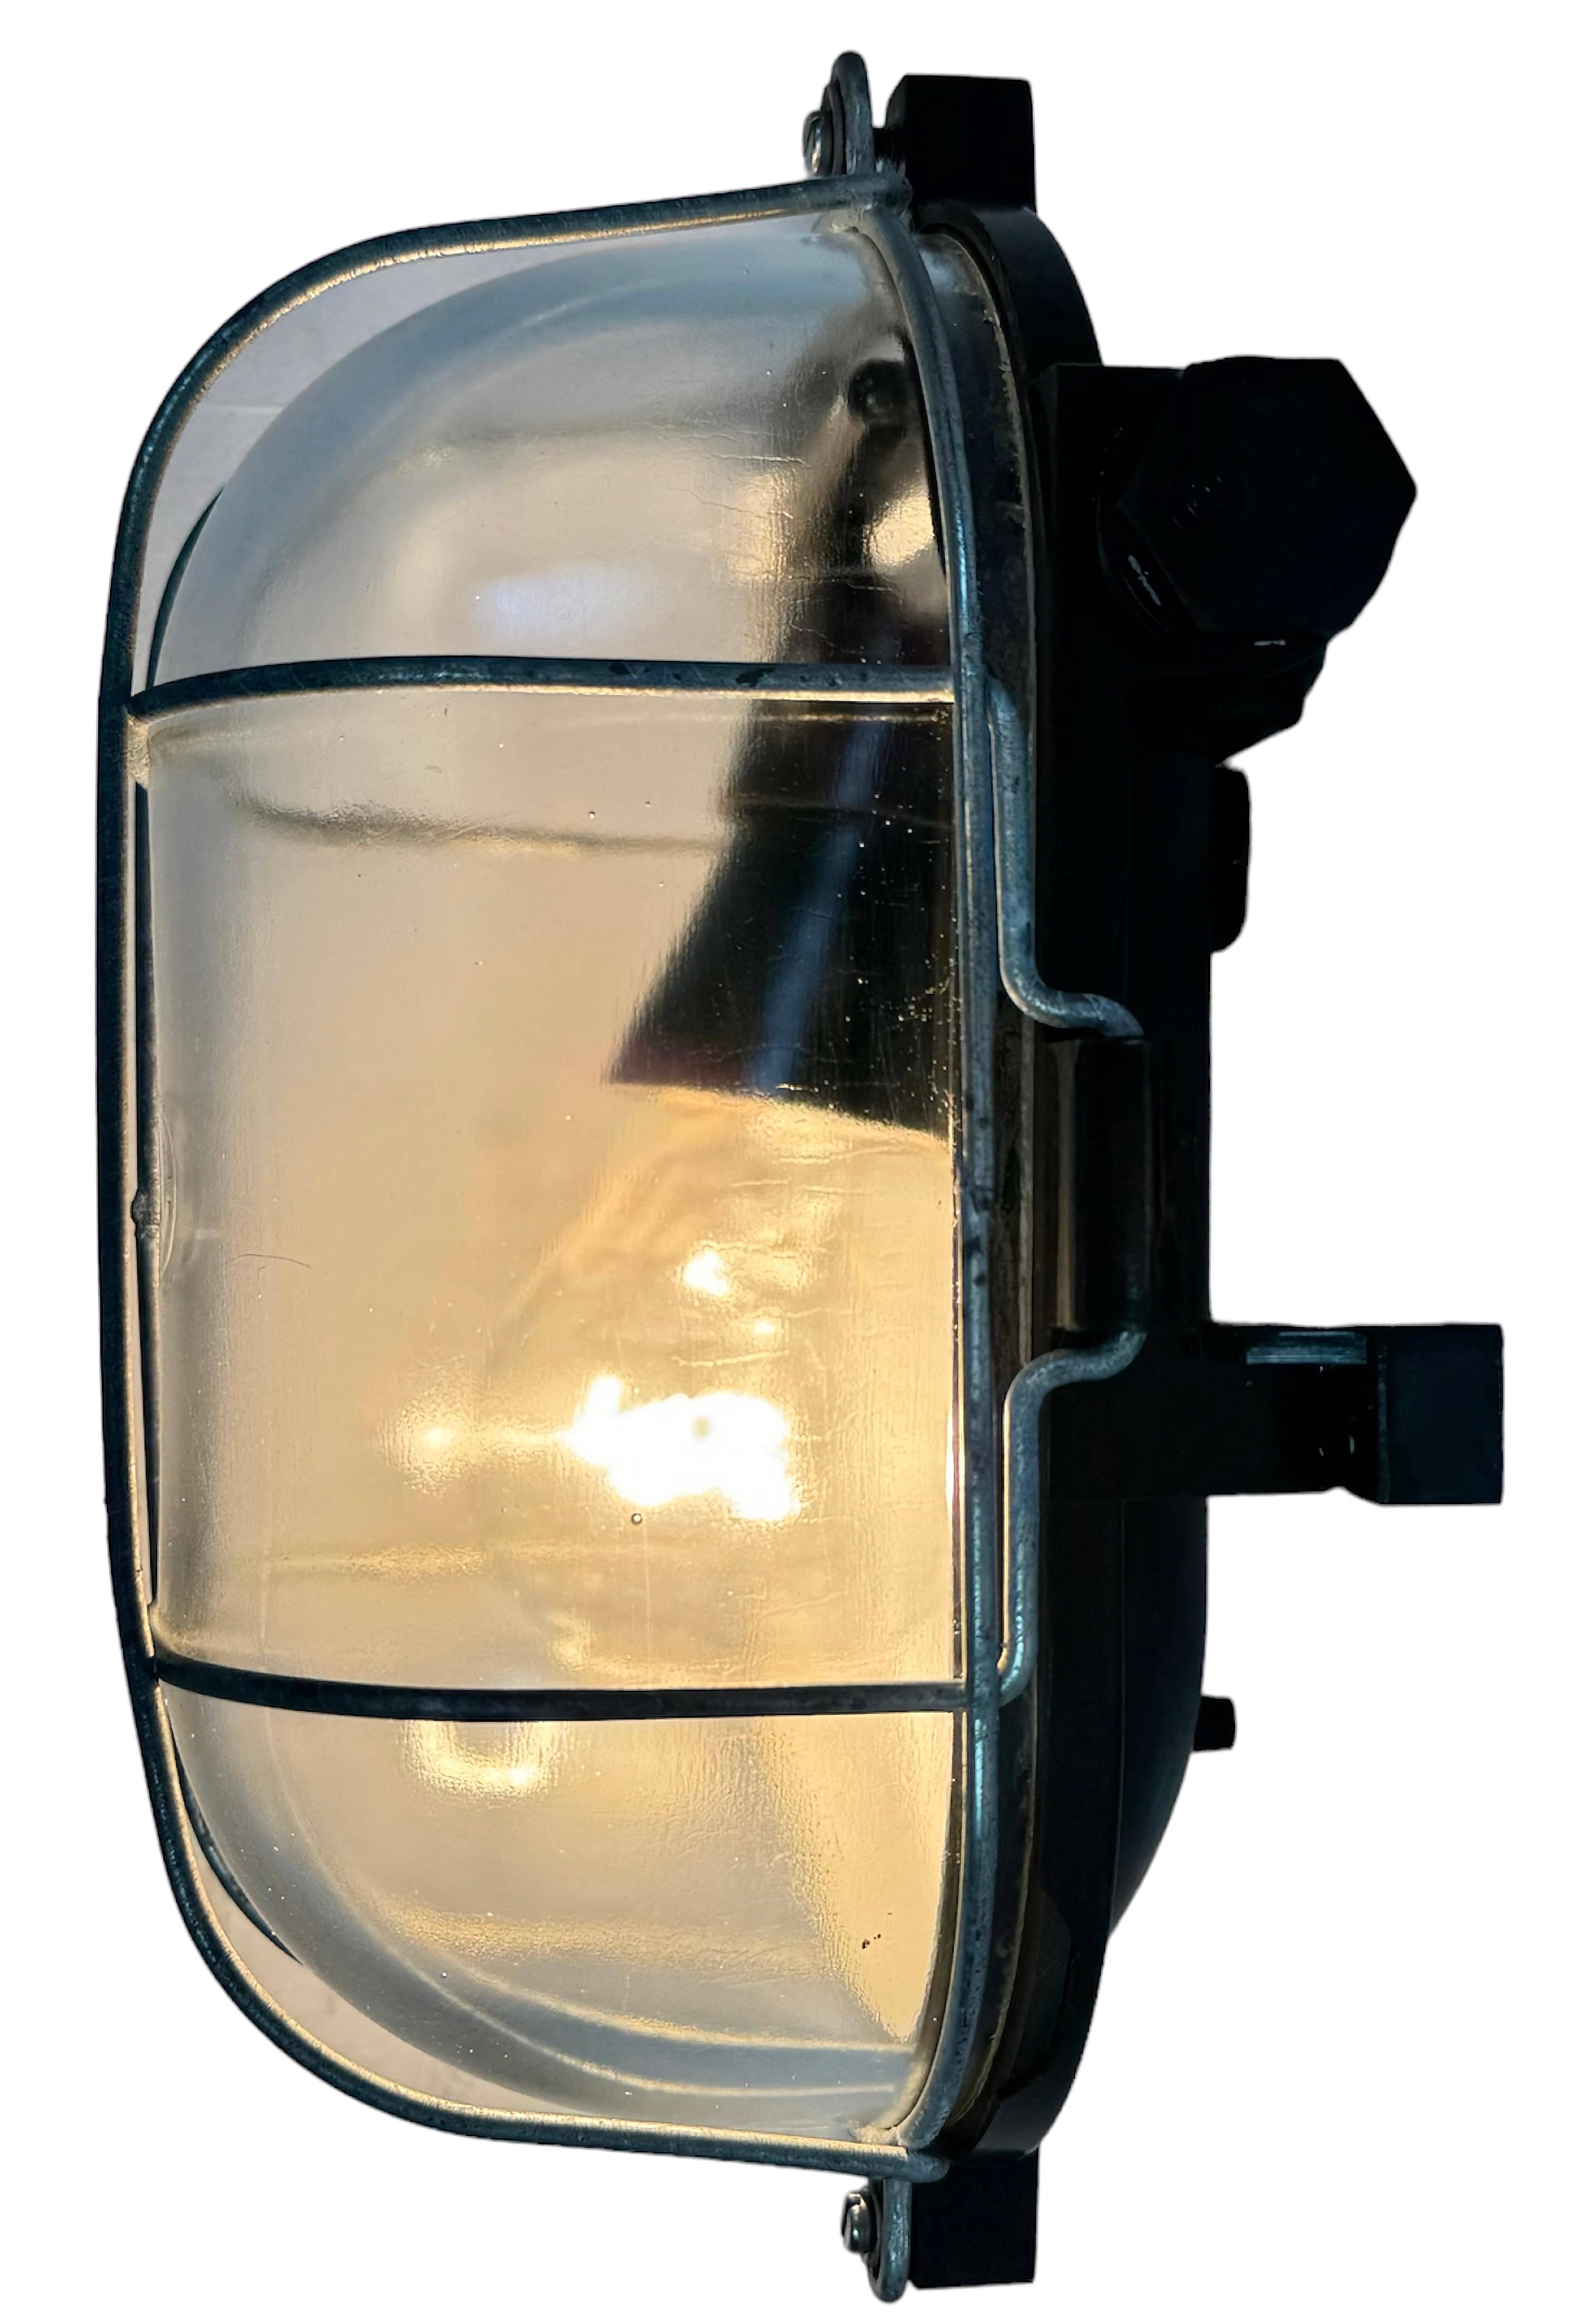 Vintage industrial brown bakelite wall lamp made in former Czechoslovakia during the 1960s. It features a bakelite body, a clear glass cover and iron grid.The socket requires standard E 27/E 26 light bulbs.  Weight of the lamp is 1 kg.